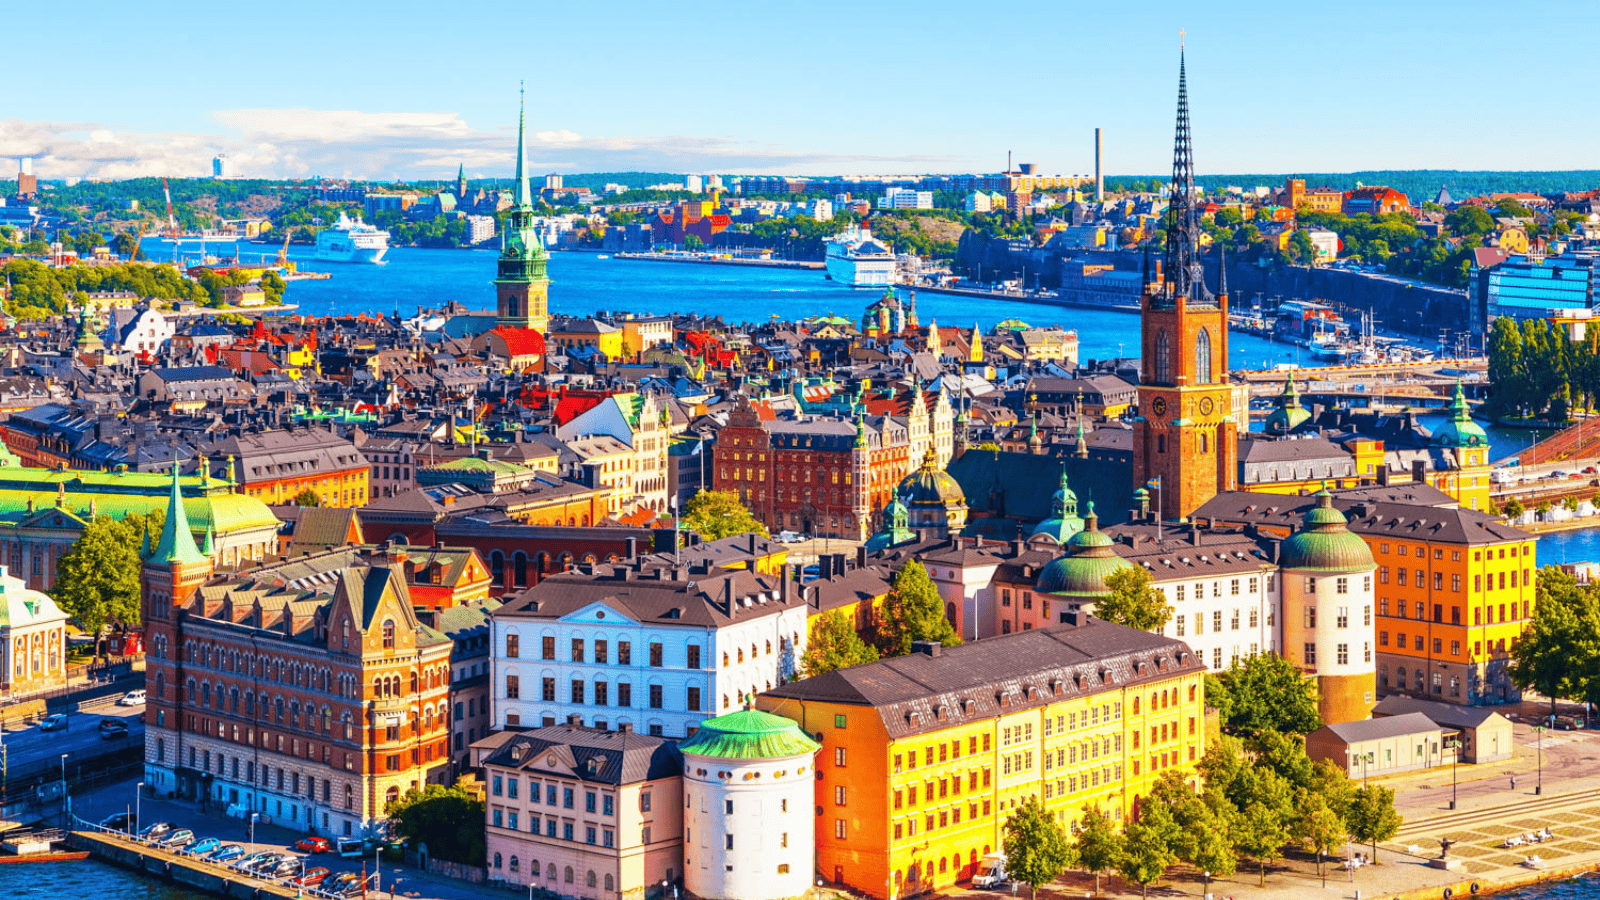 <p>Sweden’s nationwide <a href="https://sweden.se/life/equality/disability-policy" rel="nofollow external noopener noreferrer">Discrimination Policy</a> makes it a leading vacation spot for those requiring accommodations. The policy states that Swedish transportation, lodging, dining, entertainment, and recreation must be accessible. As a result, Stockholm is an excellent option for disabled travelers.</p><p>Visitors can partake in guided city tours, explore wheelchair-friendly museums, and ride the ferry to Gamla Stan, the Old Town. Stockholm’s inclusivity makes it ideal for art and history lovers with accessibility concerns. </p>